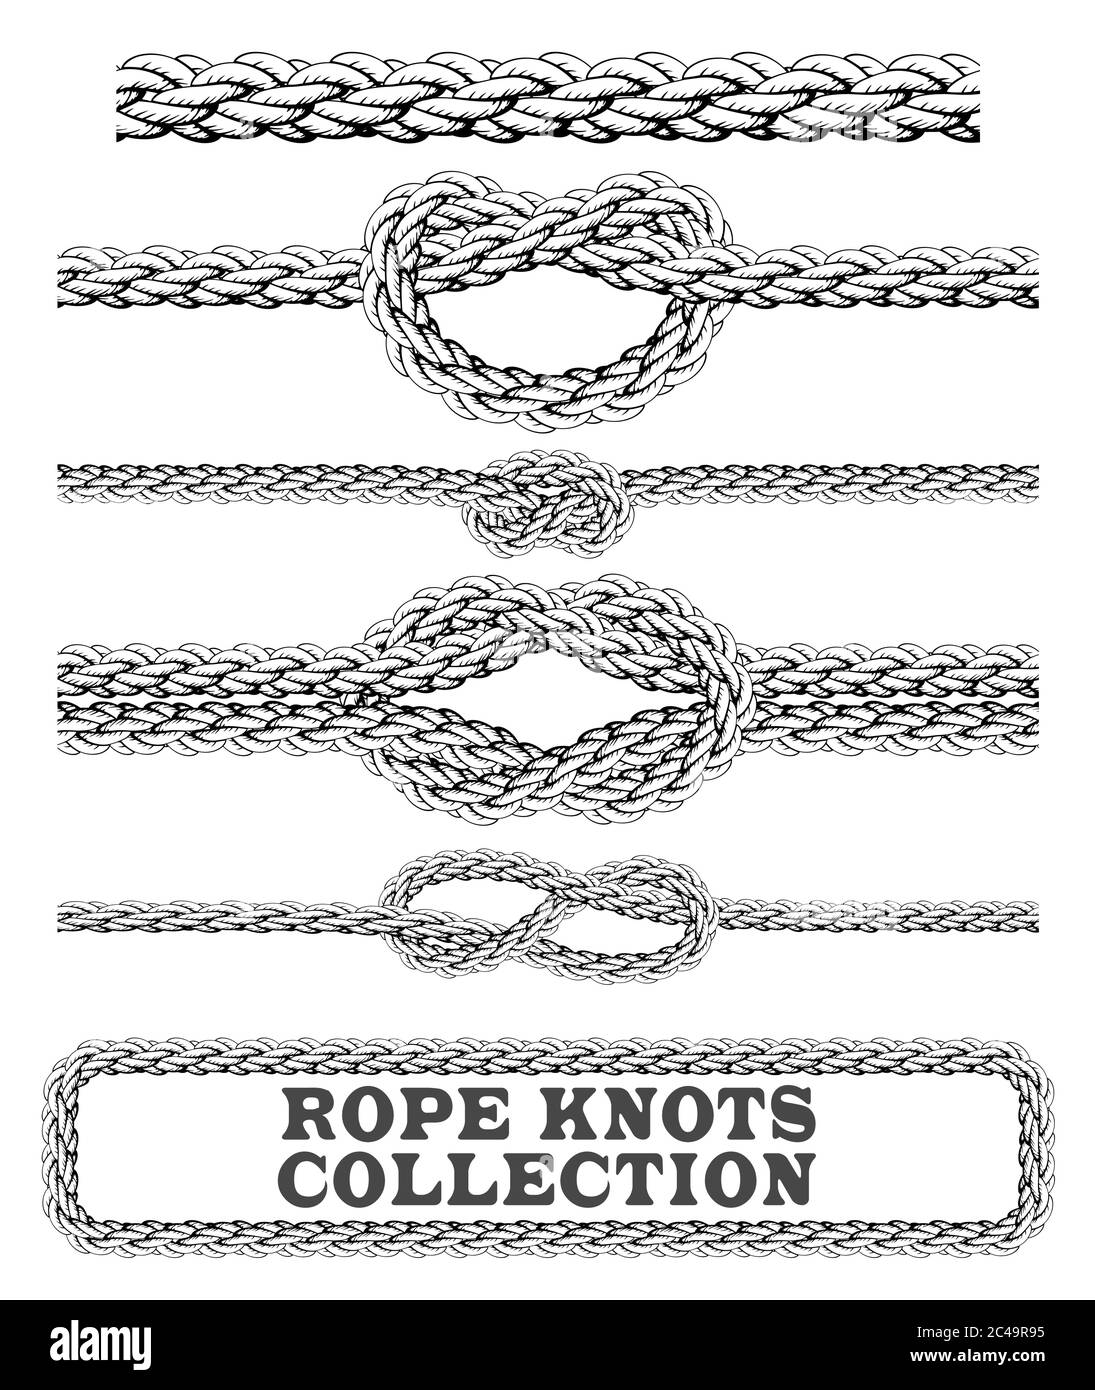 Rope knots collection. Overhand, Figure of eight and square knot. Seamless decorative elements. Vector illustration. Stock Vector